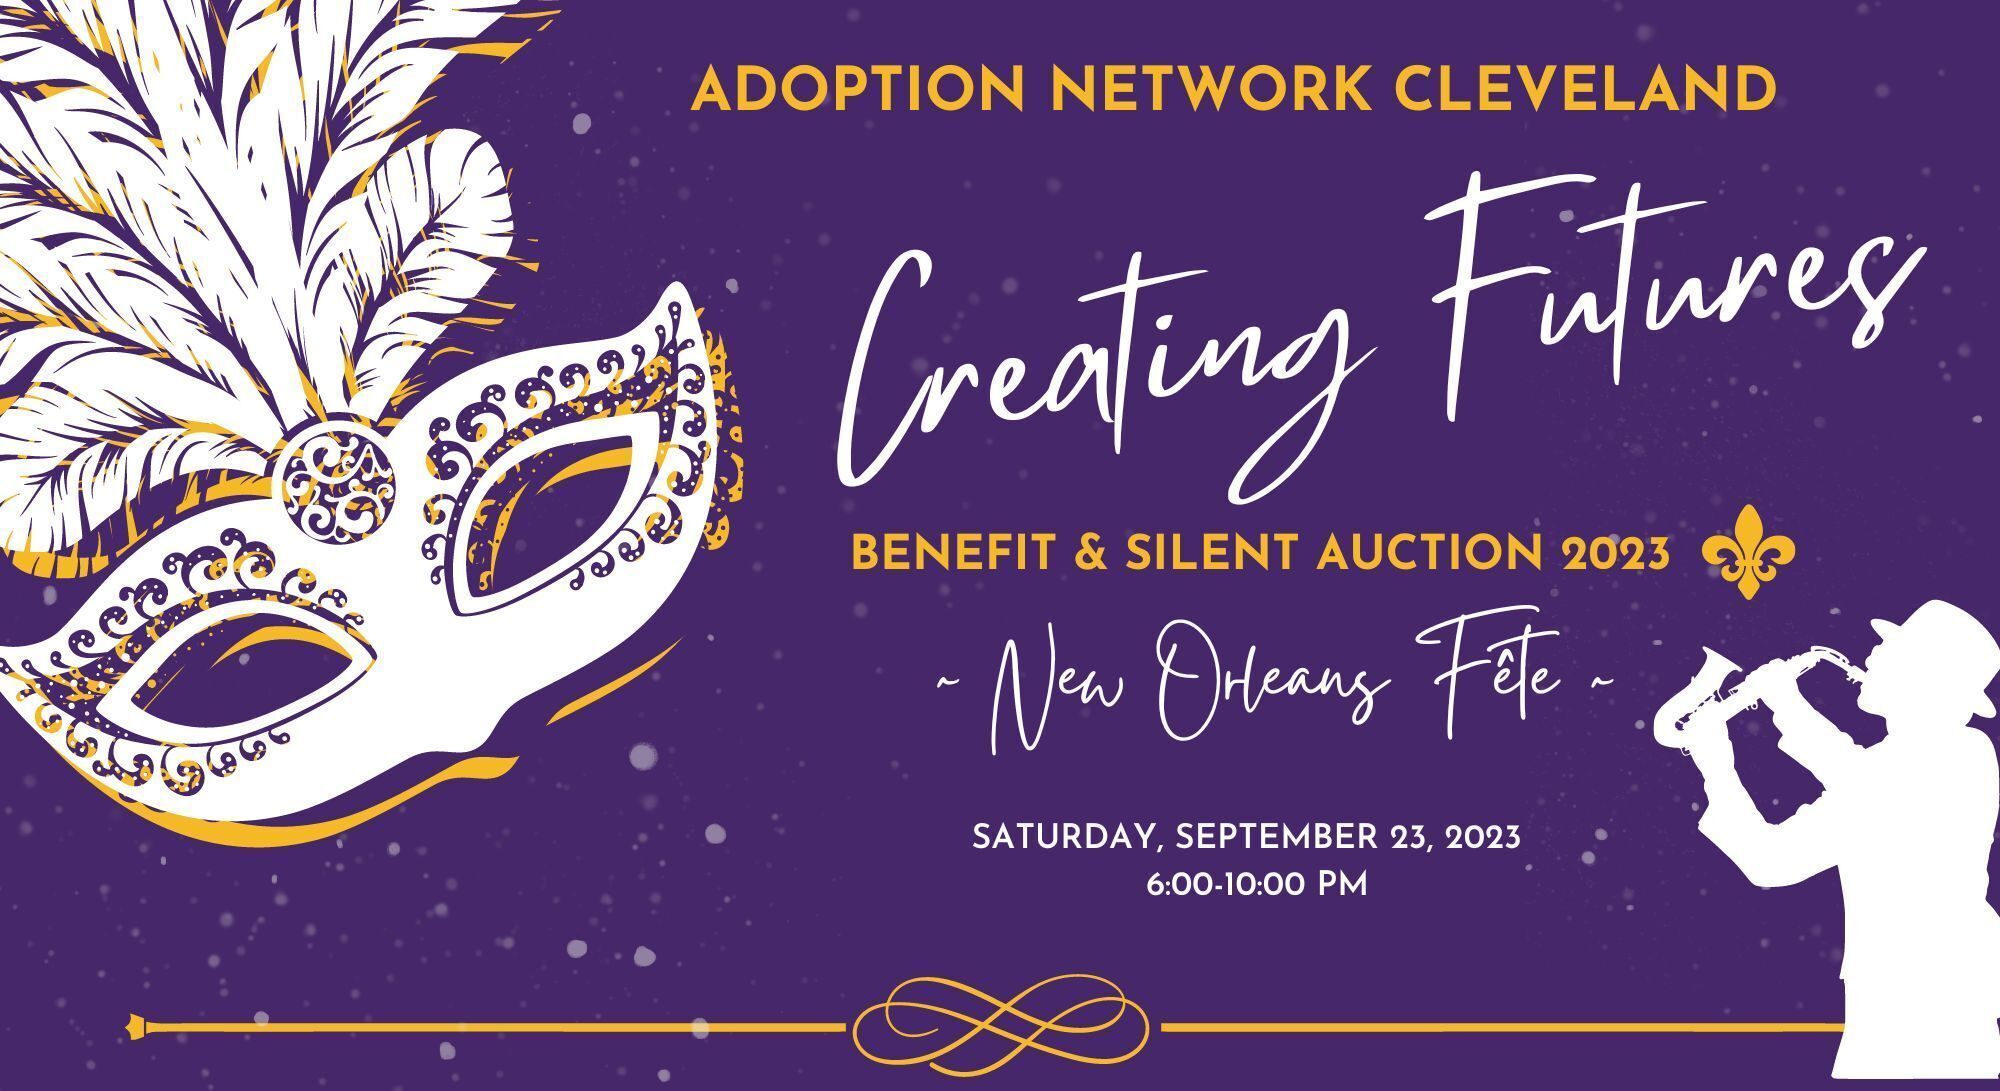 Creating Futures Benefit & Silent Auction Adoption Network Cleveland